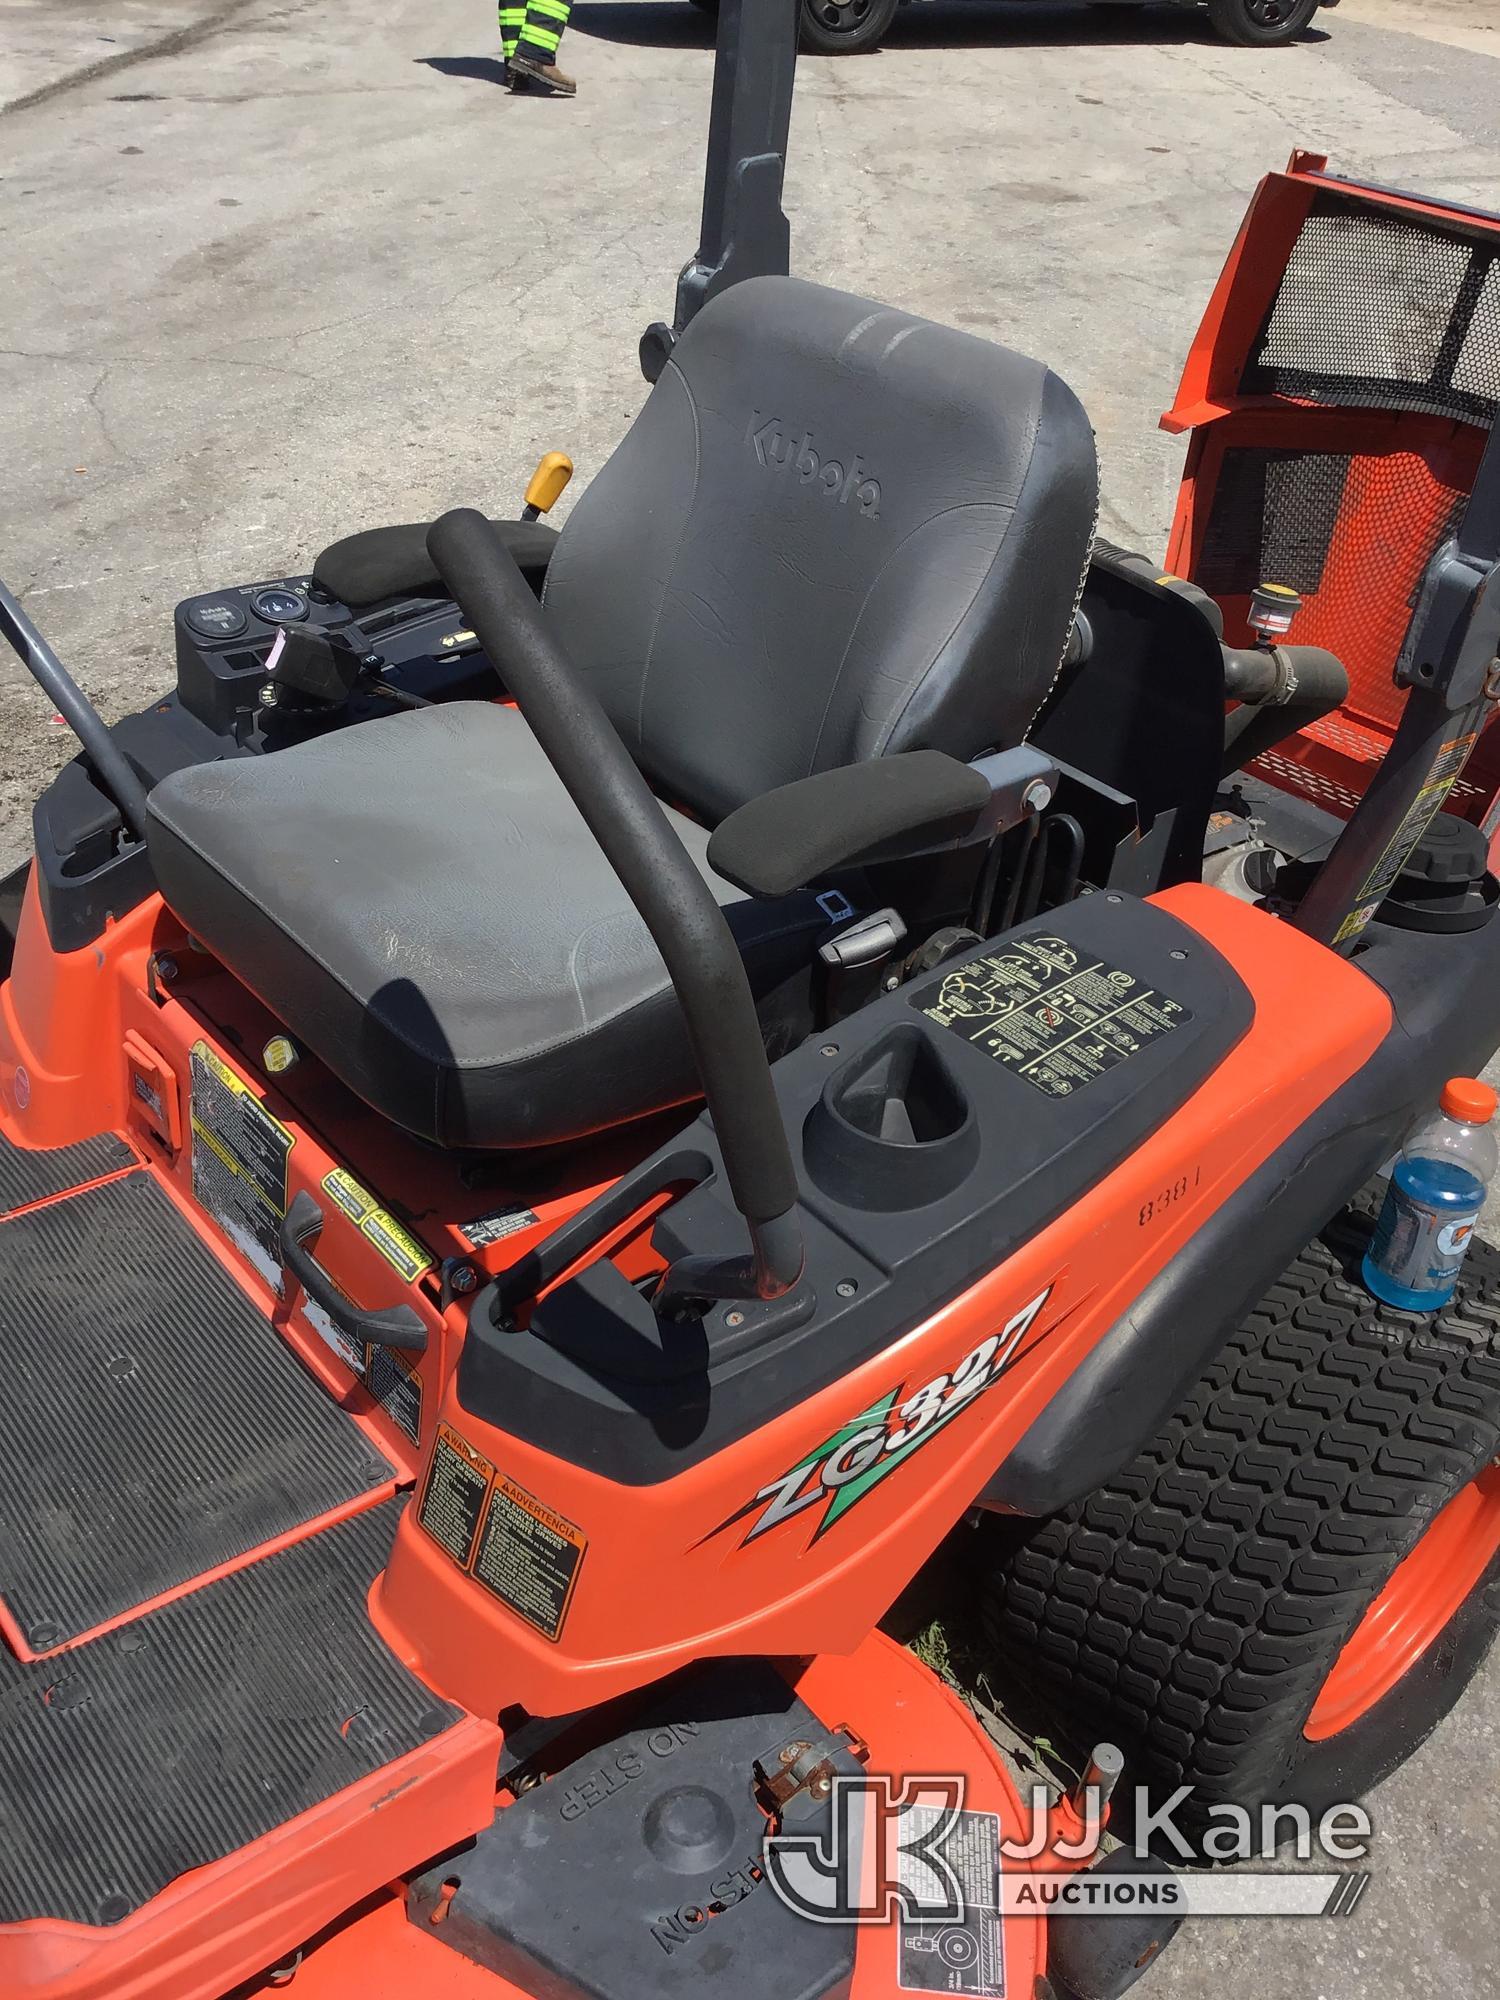 (Ocala, FL) 2009 Kubota ZG327 Lawn Mower Turns Over Does Not Run. Condition Unknown. (Flat Tires, 60